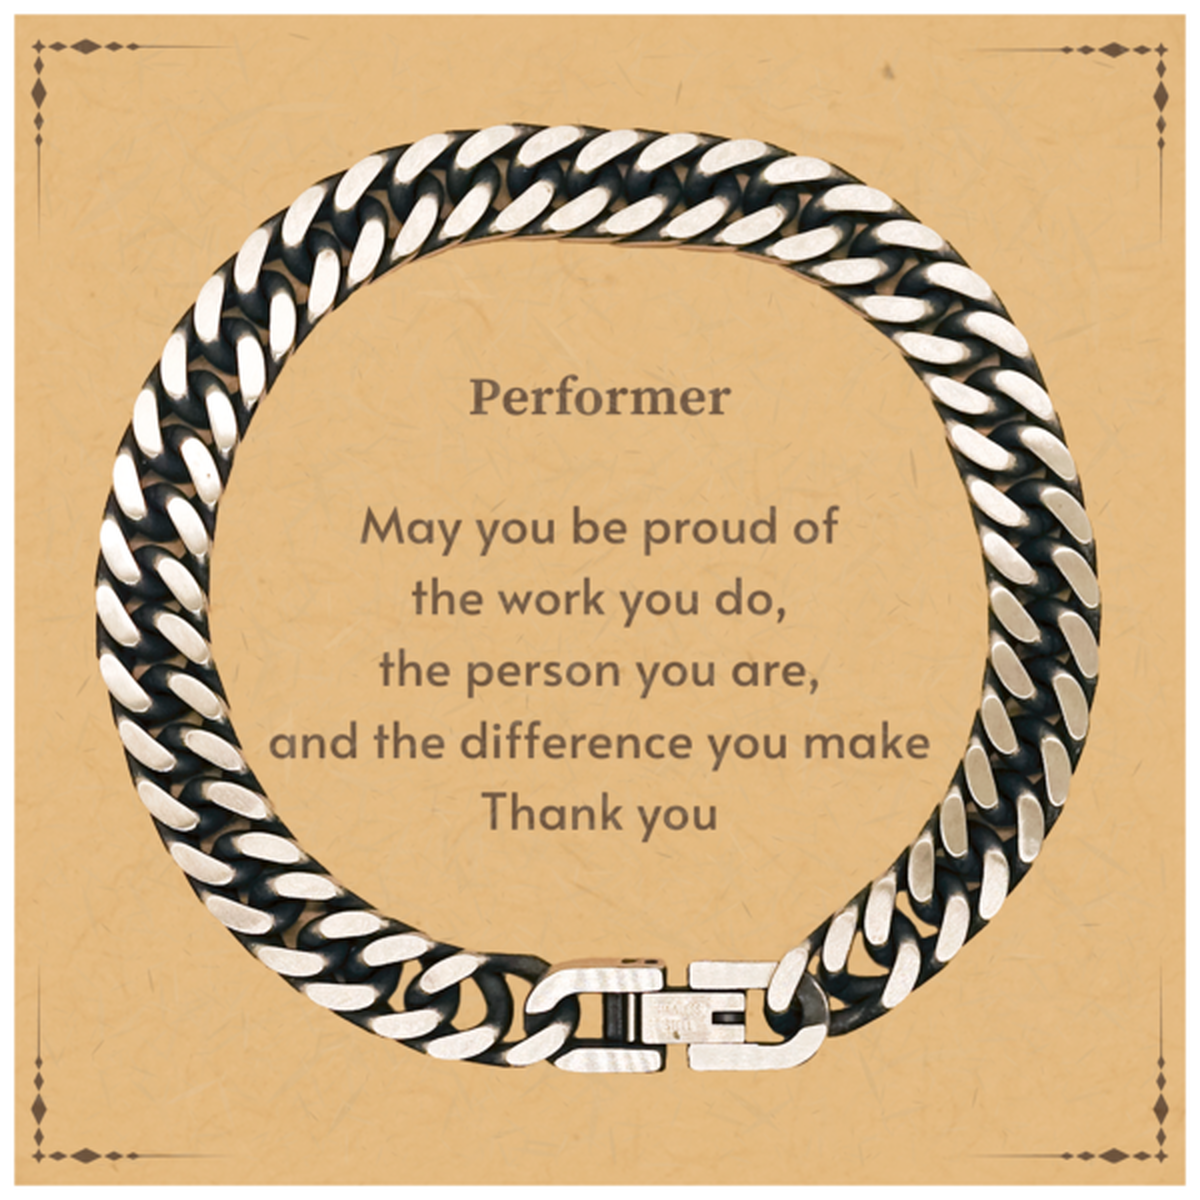 Heartwarming Cuban Link Chain Bracelet Retirement Coworkers Gifts for Performer, Performer May You be proud of the work you do, the person you are Gifts for Boss Men Women Friends